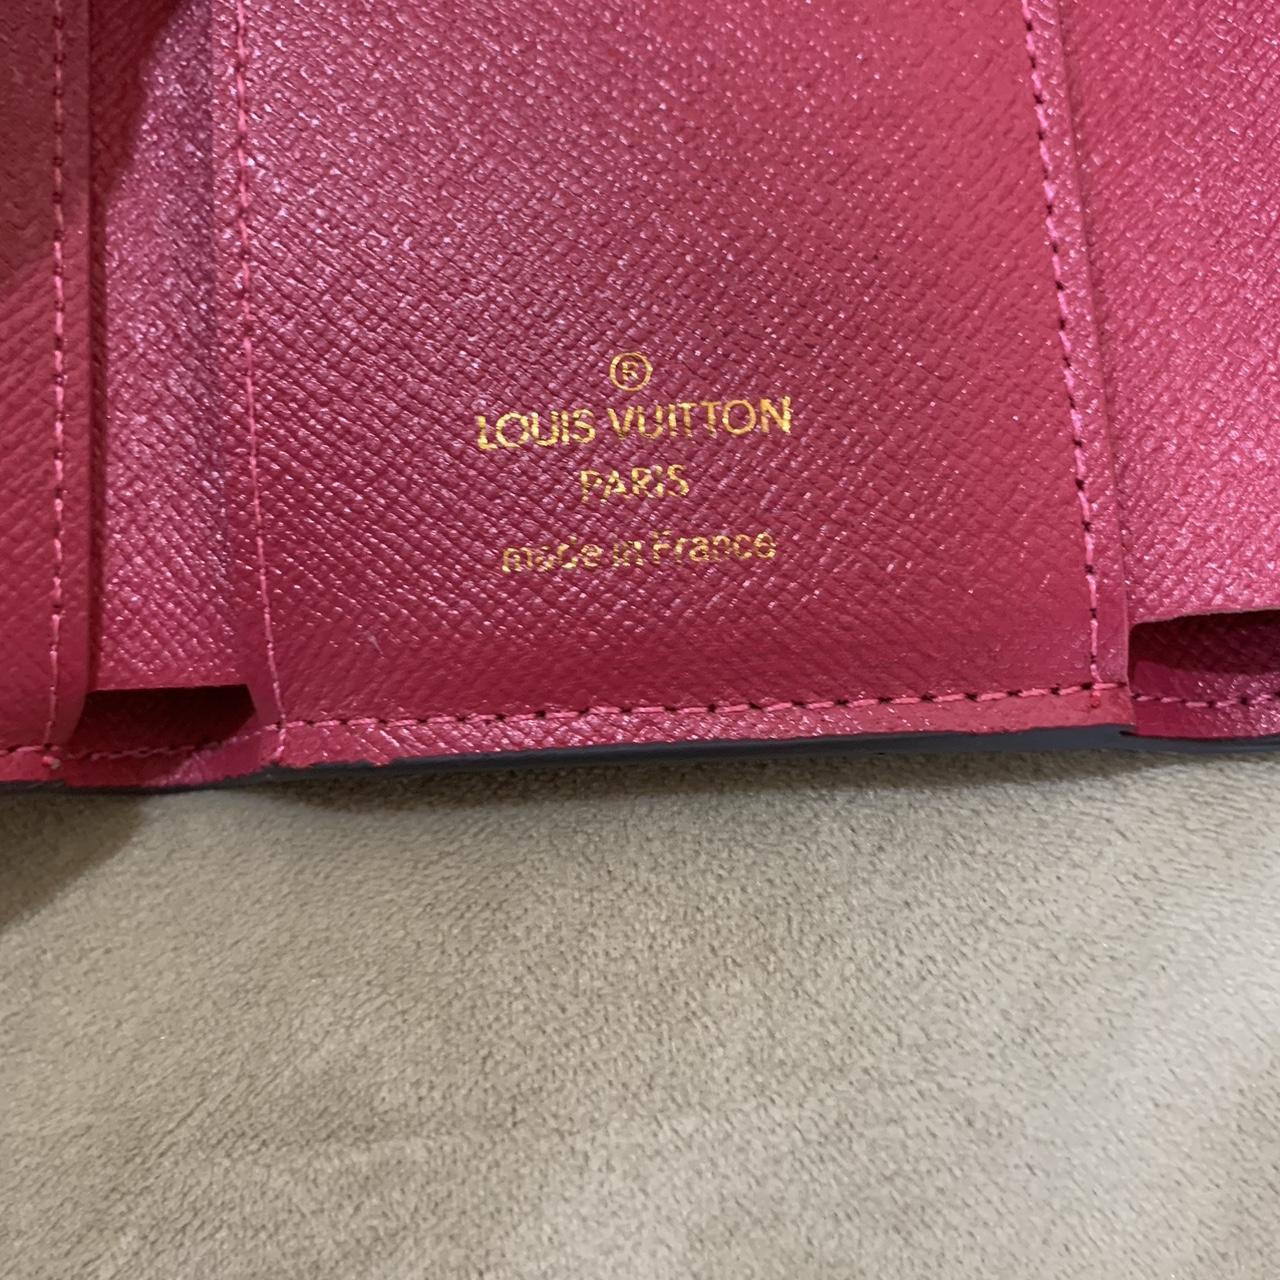 Hot Pink LV wallet very cute perfect hand fitting to - Depop